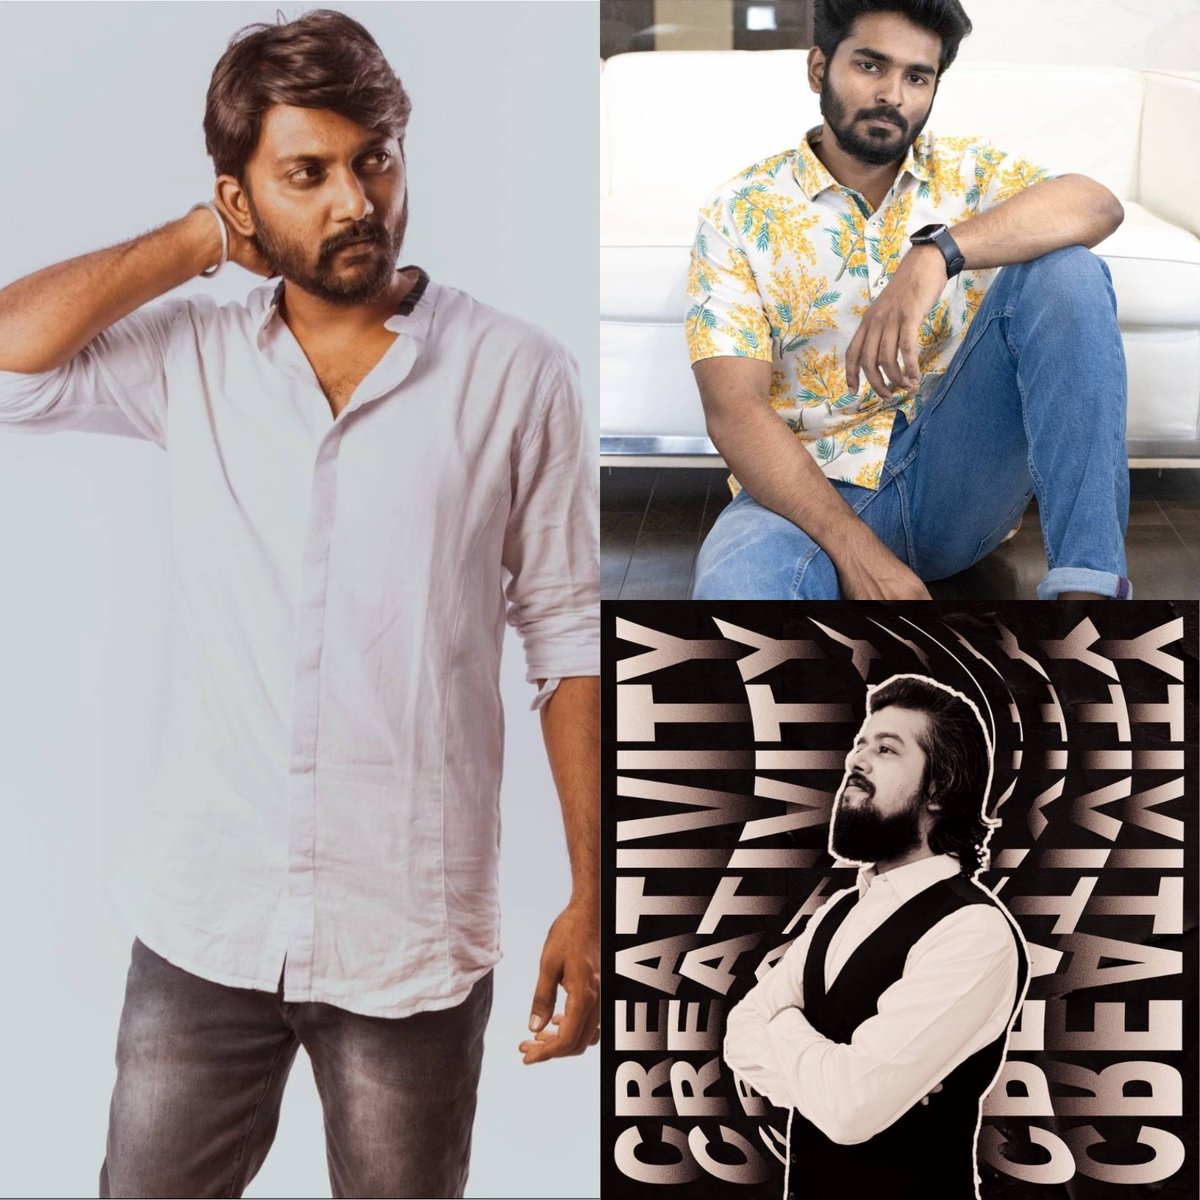 For this Coming of age film consists of 3 phases - School, College, Post College would be captured by 3 different cinematographers

Famous 🎥 Balasubramaniem  
Dinesh Purushothaman - Vilangu
Prabhu Ragav - Pizza 3 
  
 Music - Leon James ♥️

Cast includes famous YT stars